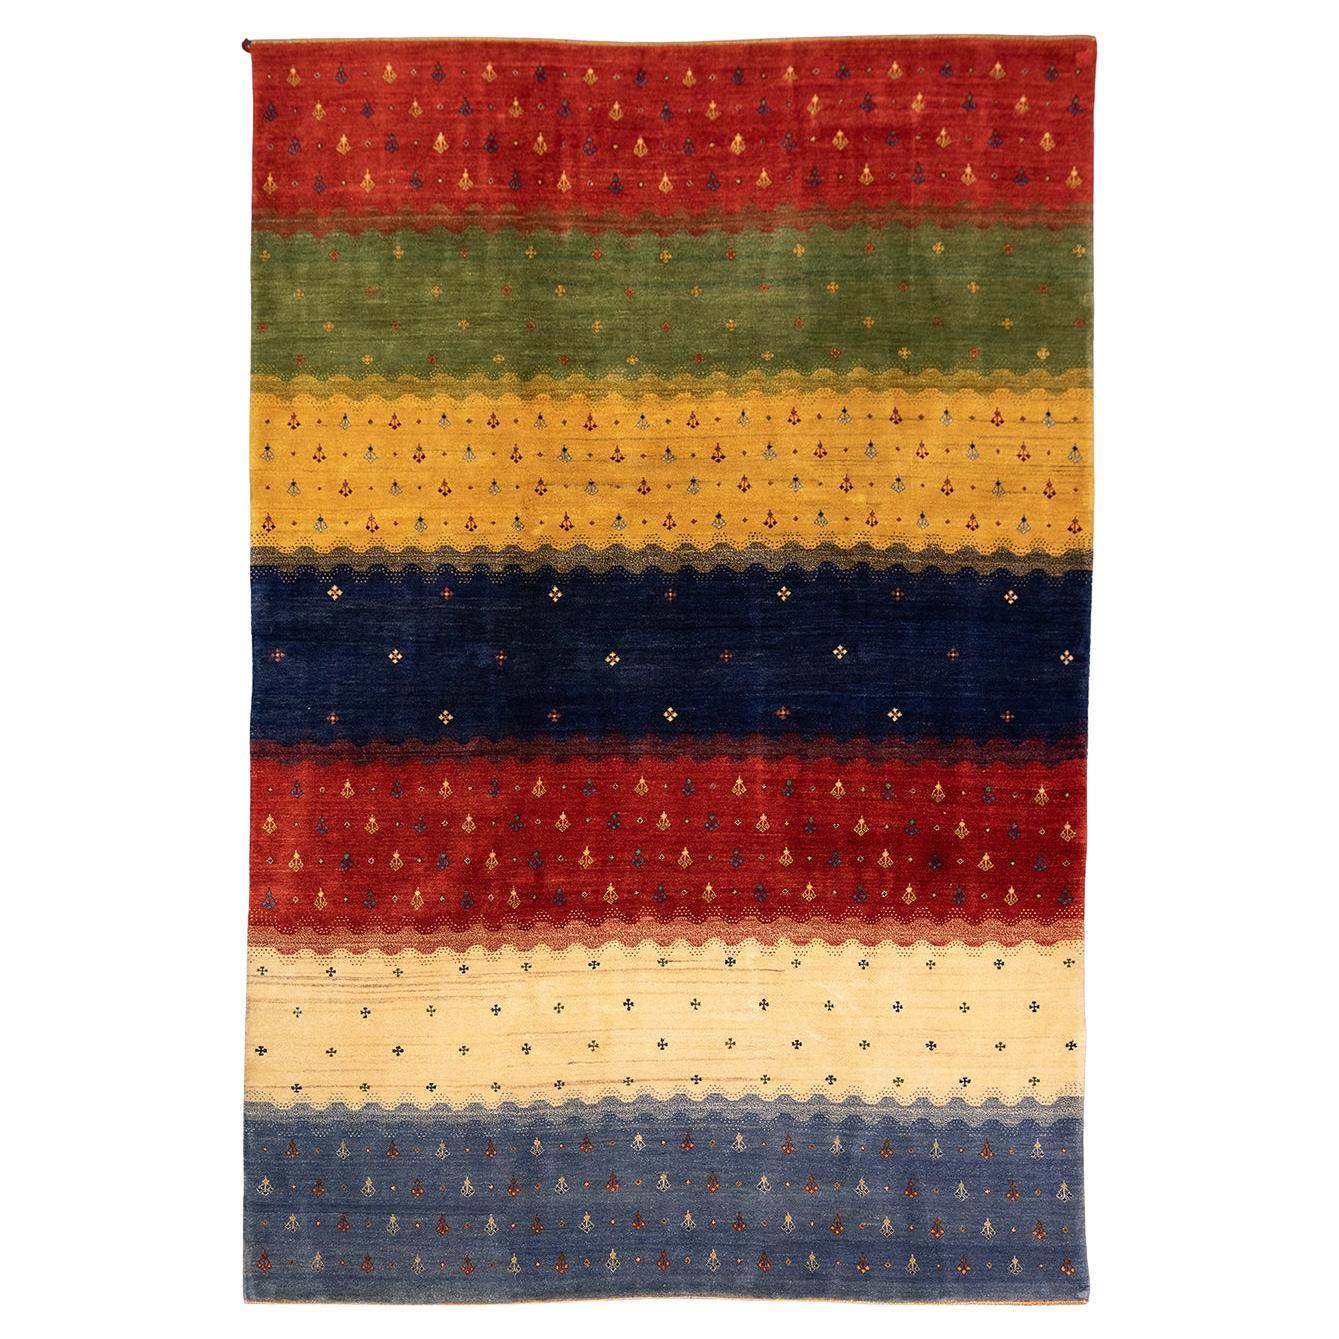 Gabbeh Rug Colorful Striped Pattern